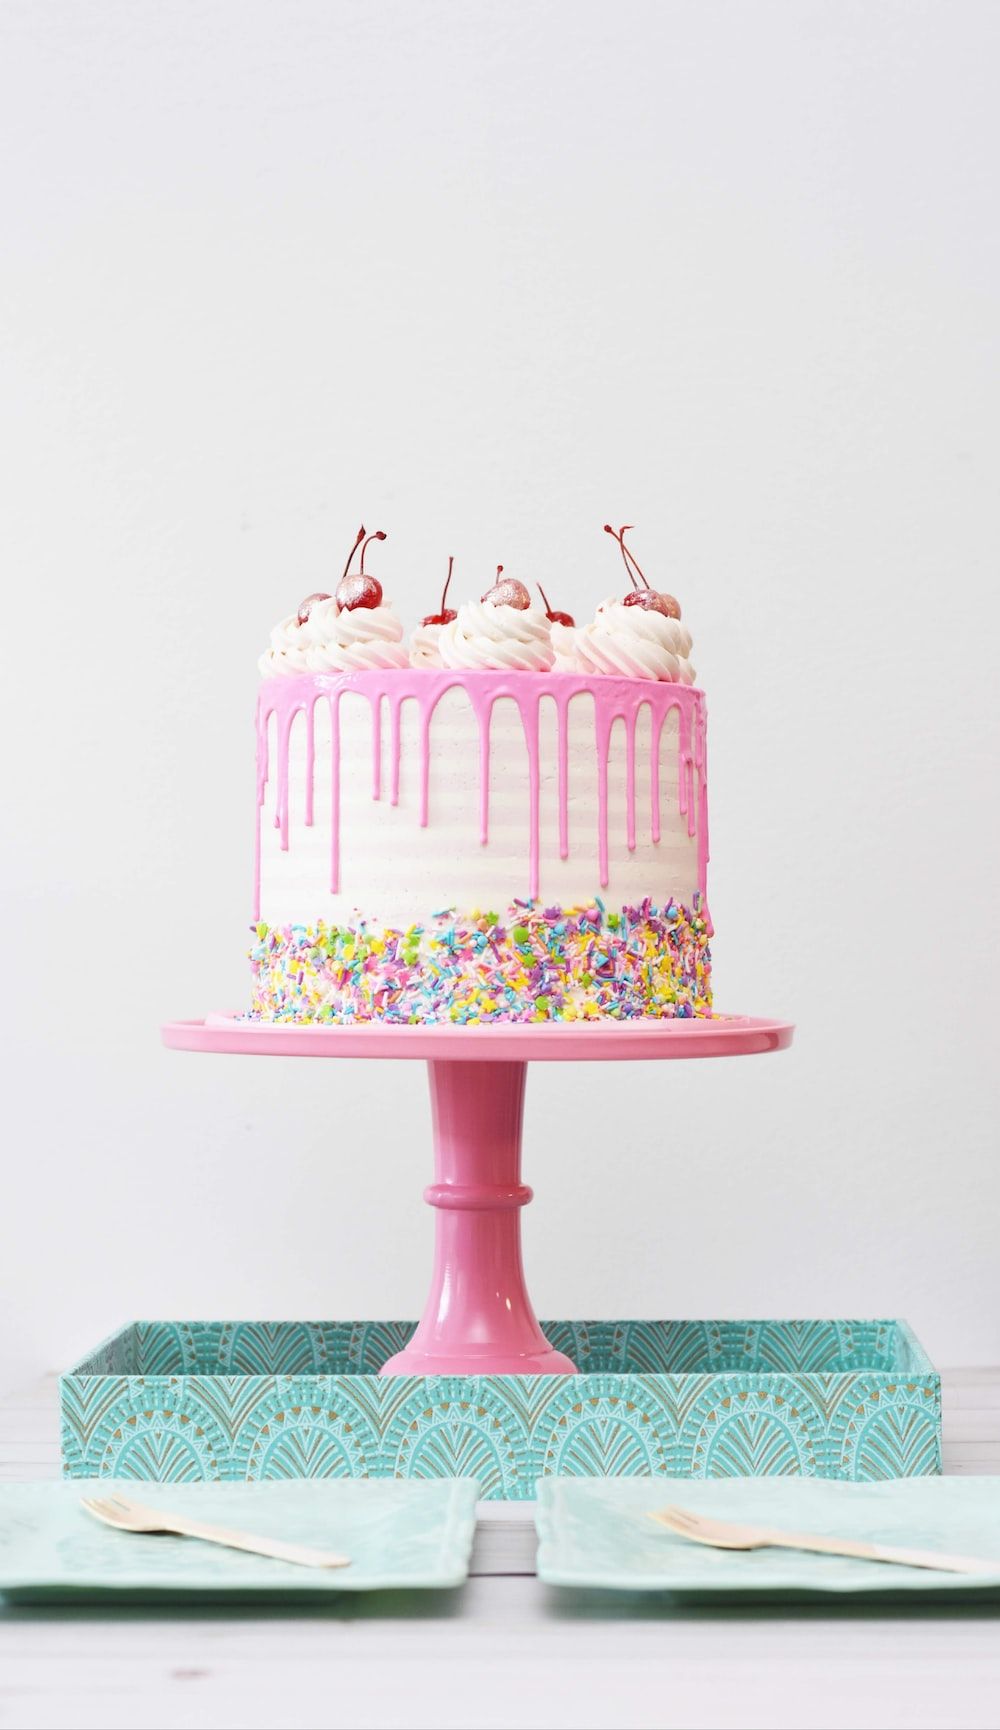 A cake with pink icing and sprinkles on a pink cake stand. - Birthday, cake